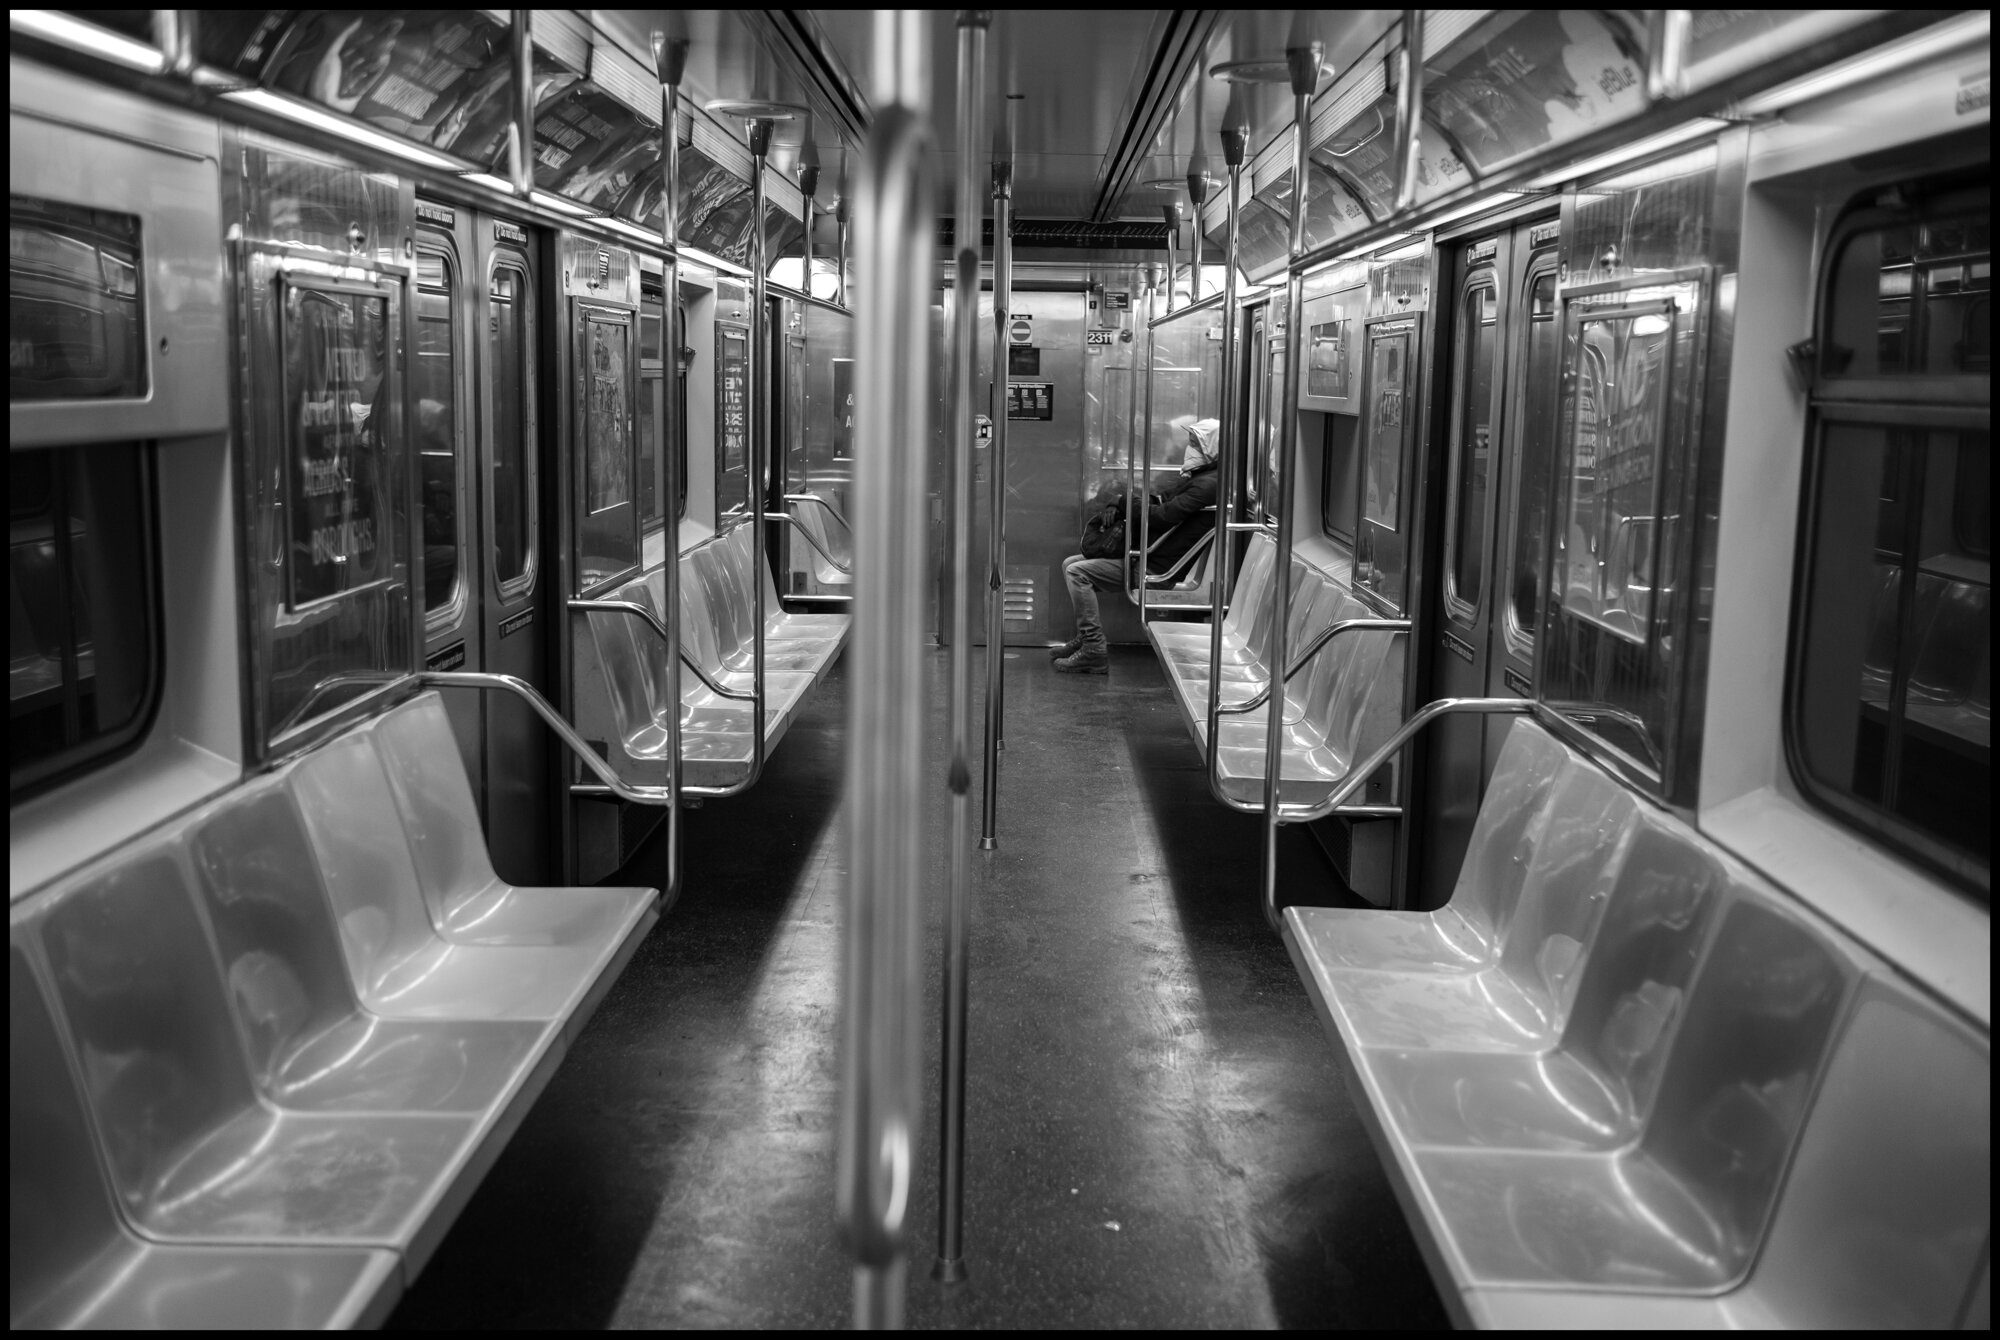  A lone passenger rides south on the #1 train.  March 26, 2020 ©Peter Turnley  ID# 04-017 